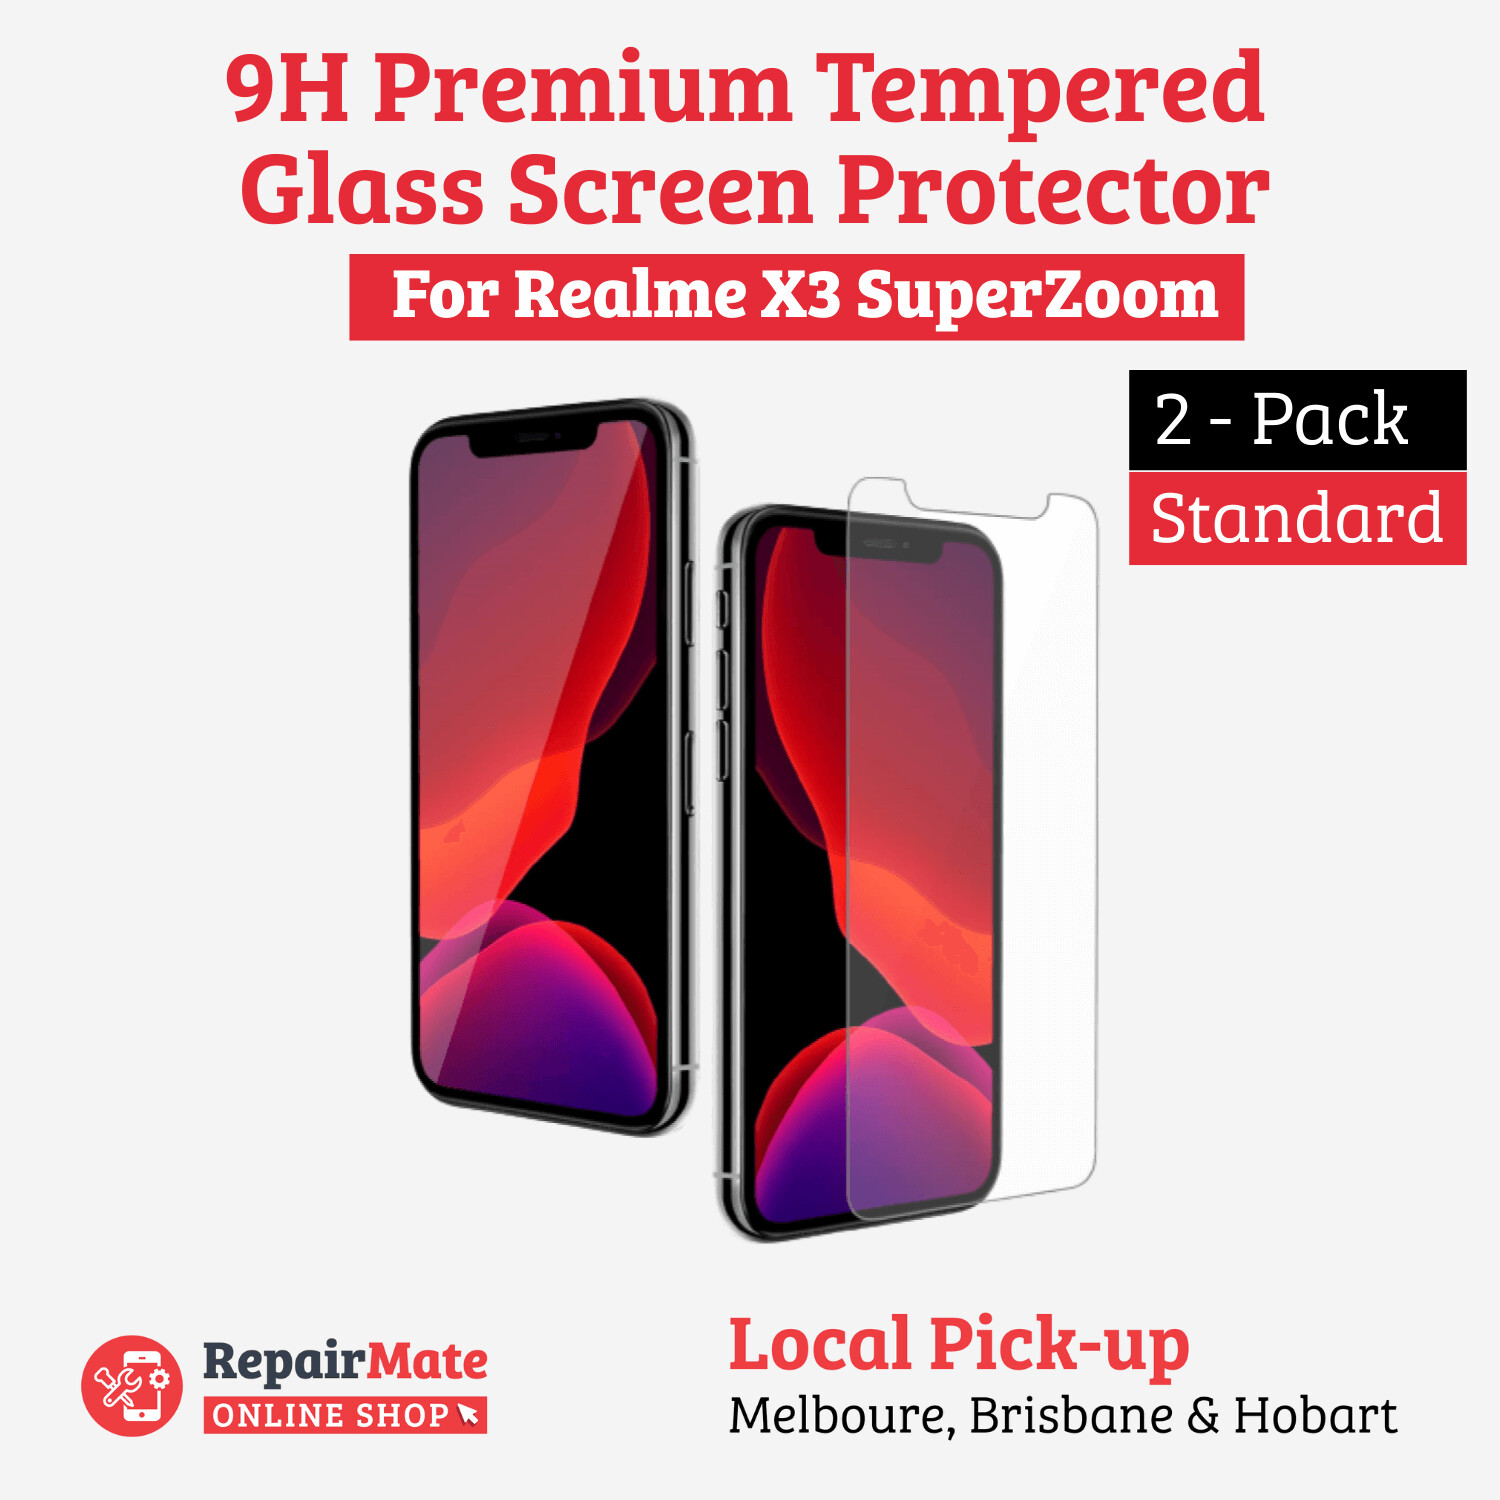 Realme X3 SuperZoom 9H Premium Tempered Glass Screen Protector [2 Pack]